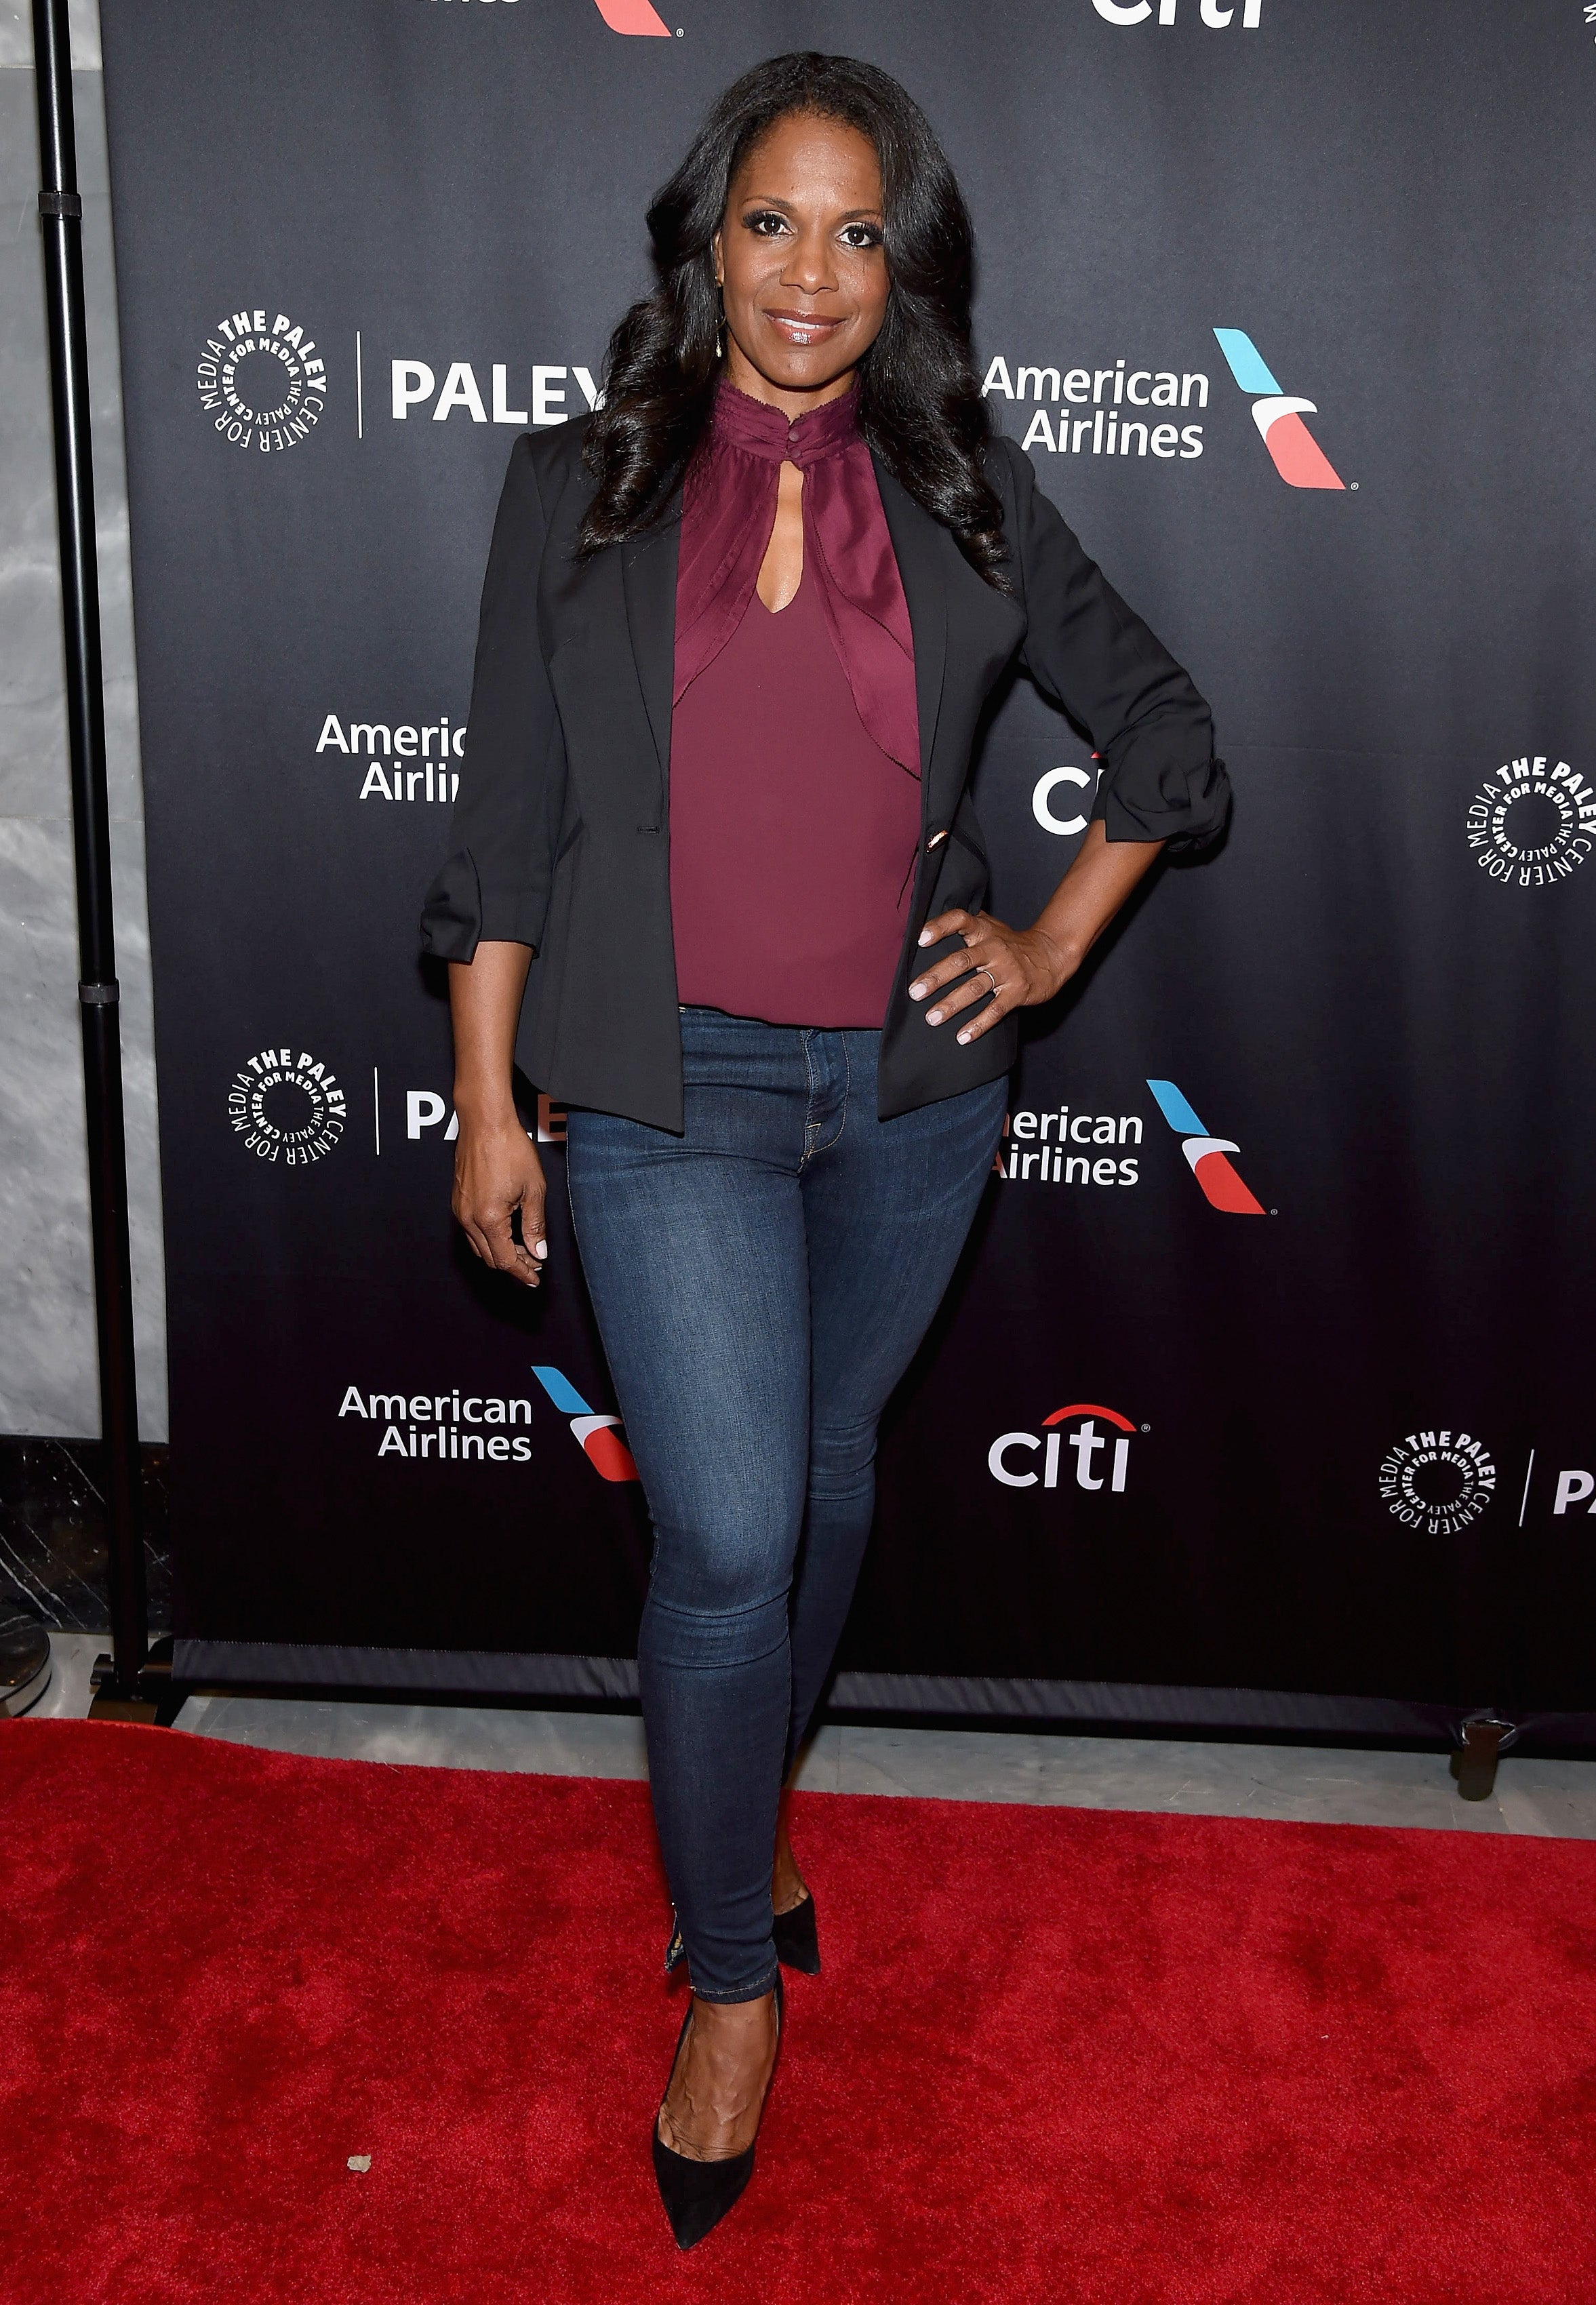 Eve, Monica, Mara Brock Akil And More Celebs Out And About